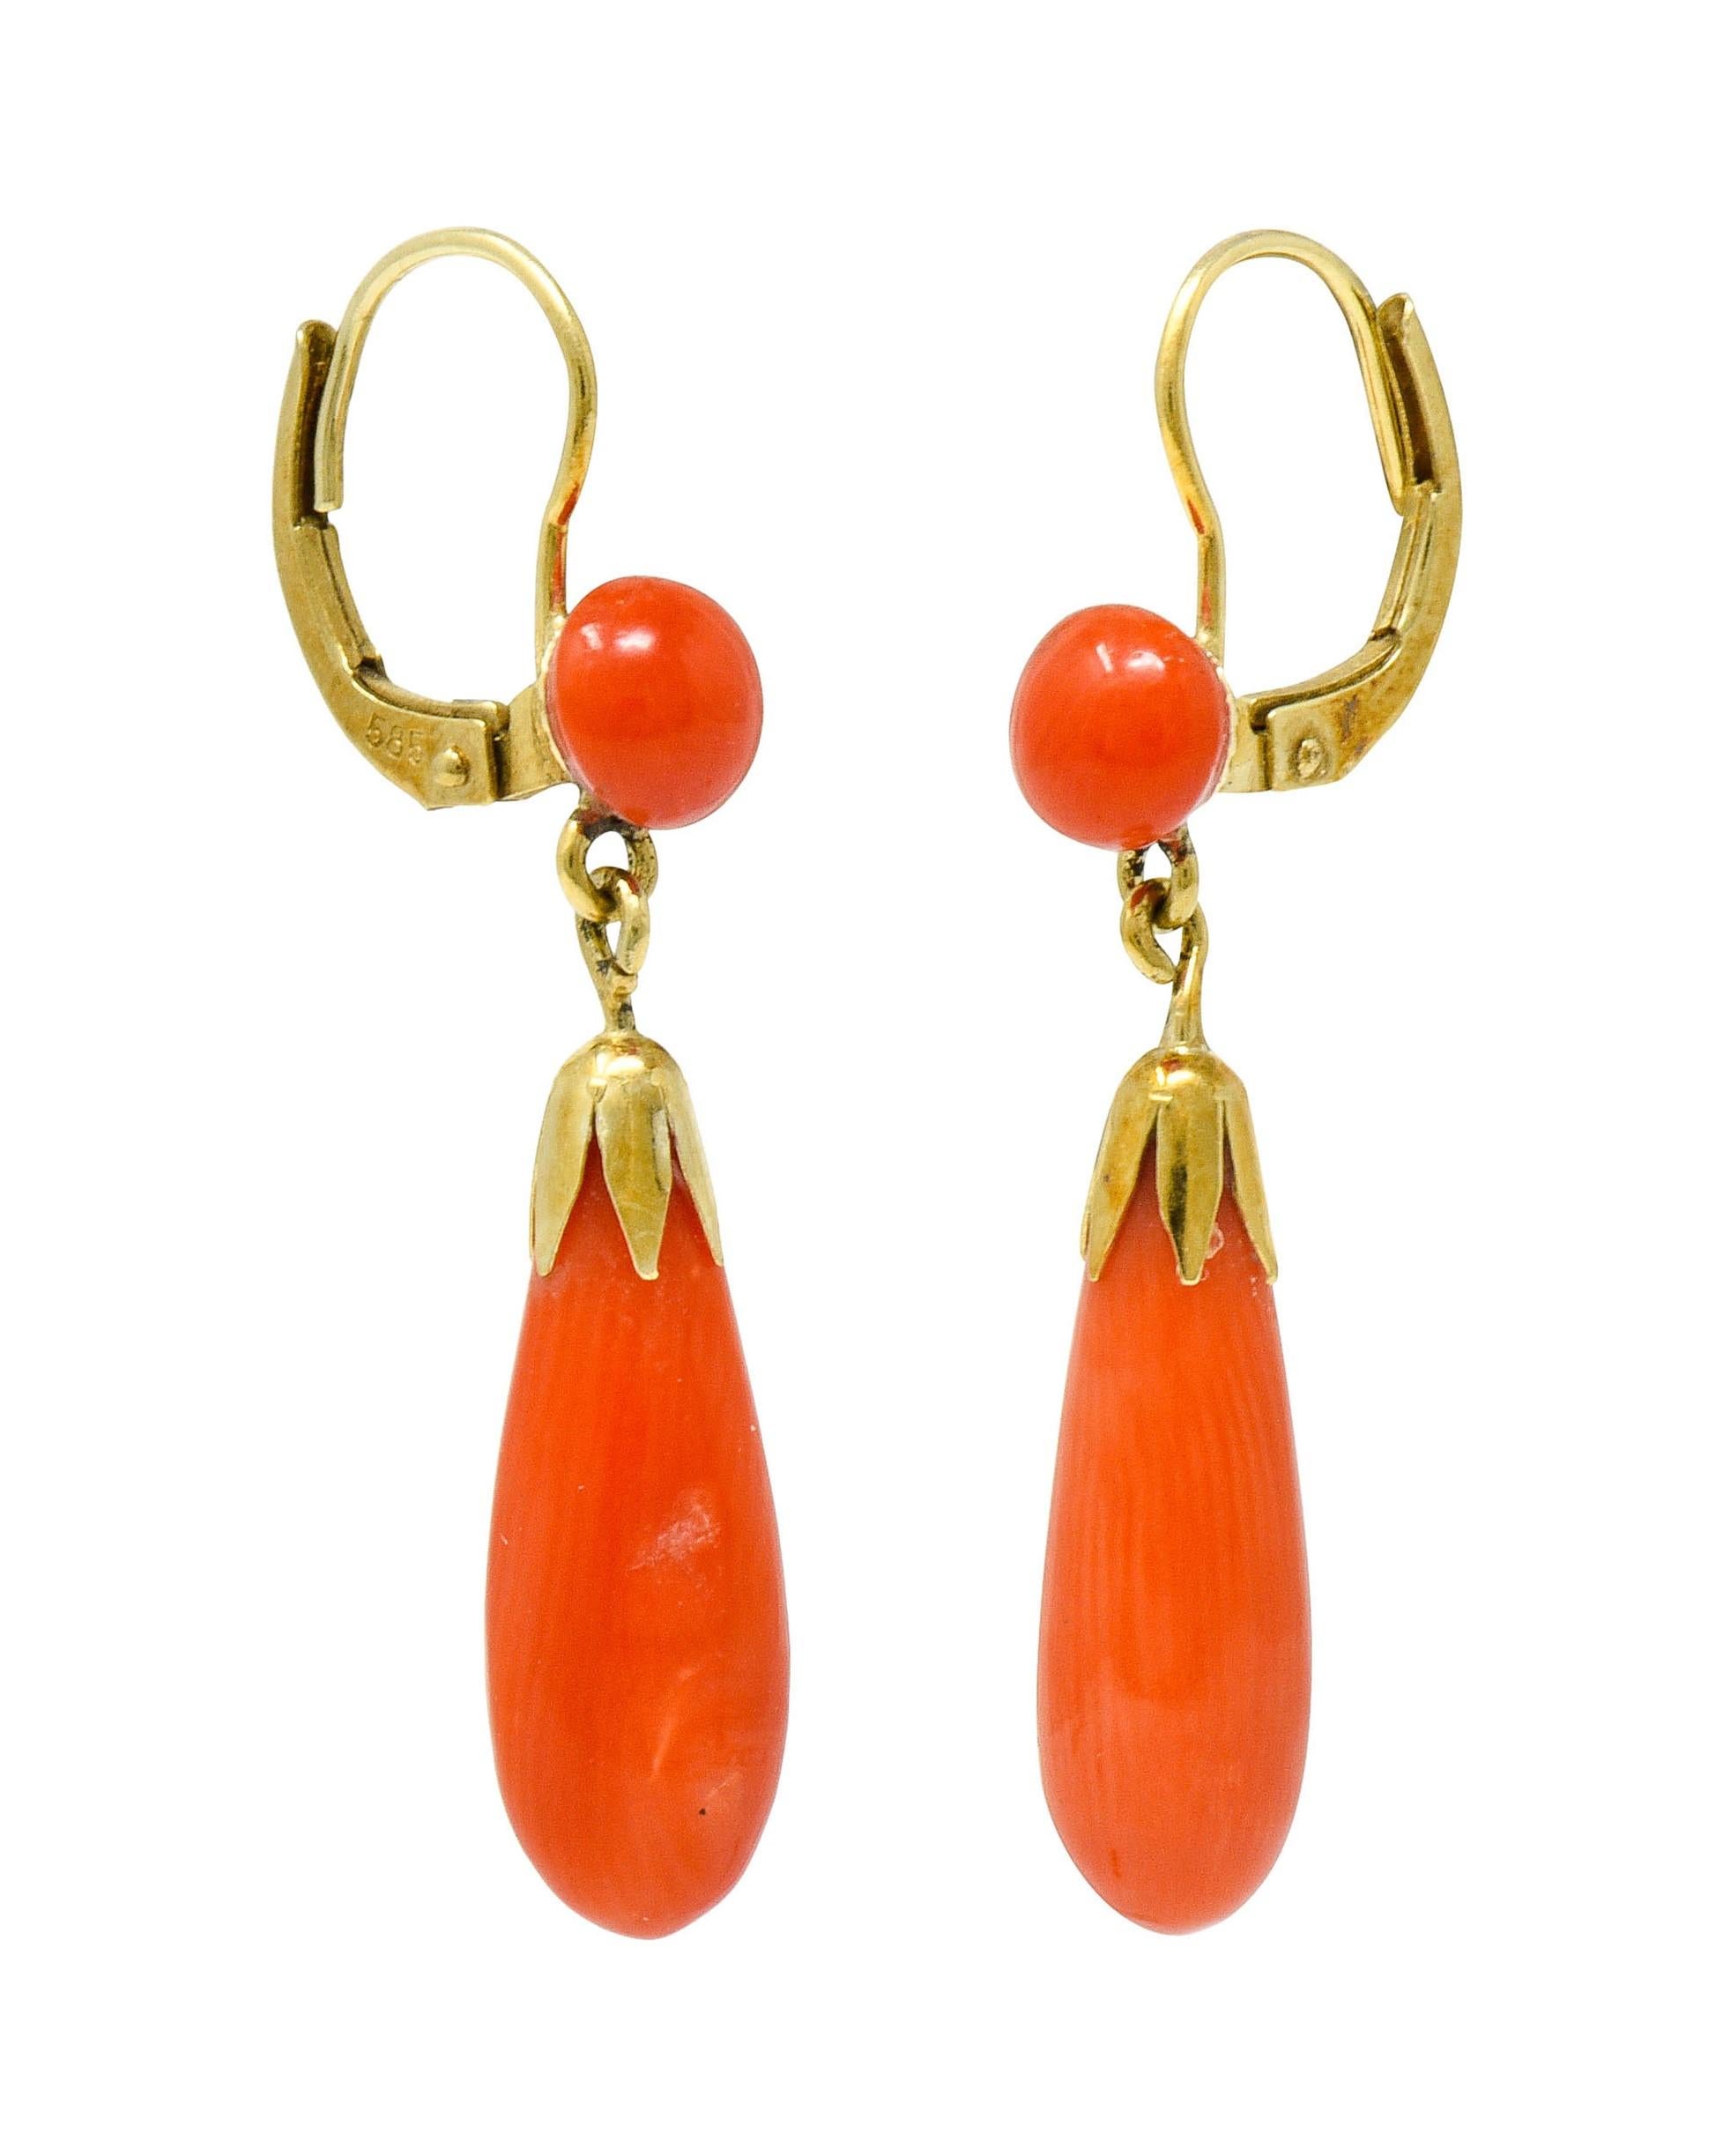 Drop earrings are designed with 5.5 mm round coral button cabochon surmounts

Suspending articulated pampel coral drops with a scalloped gold cap

Coral is opaque and a well-matched reddish-orange color

Completed by hinged leverbacks

Stamped 585